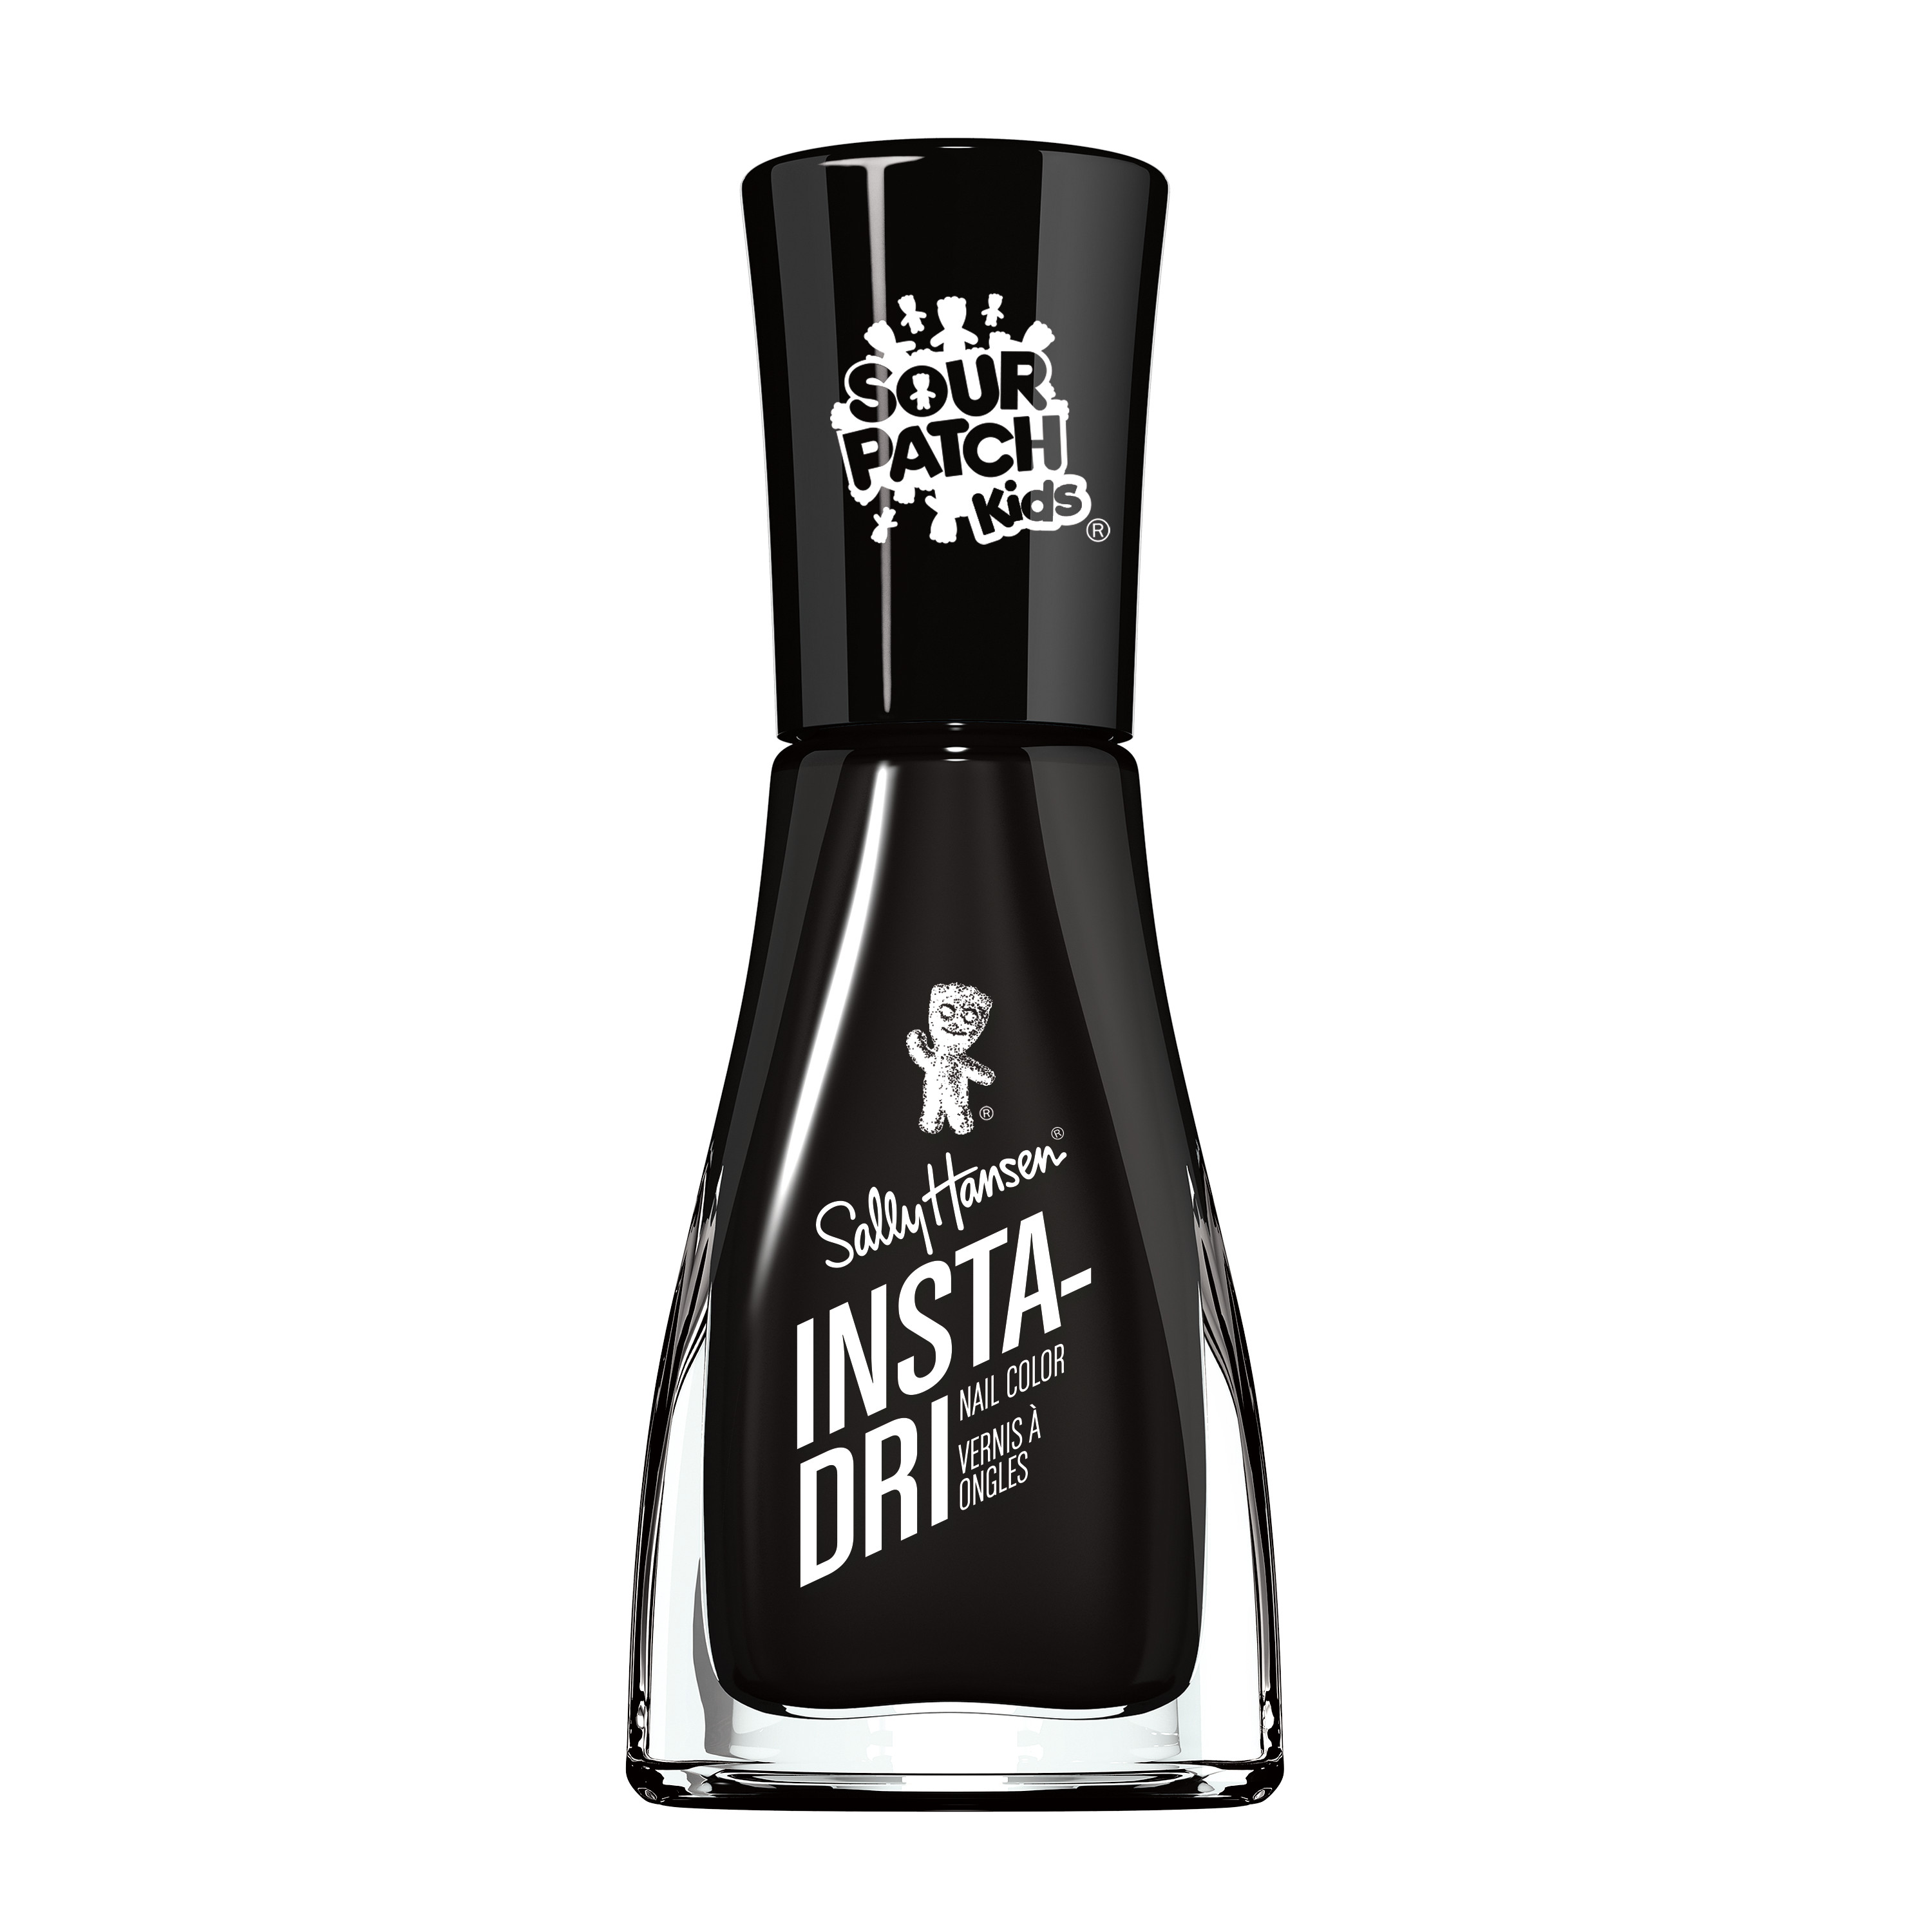 Sally Hansen Insta-Dri Nail Color x Sour Patch Kids, Ghouls Night Out, 0.31 oz - image 1 of 4